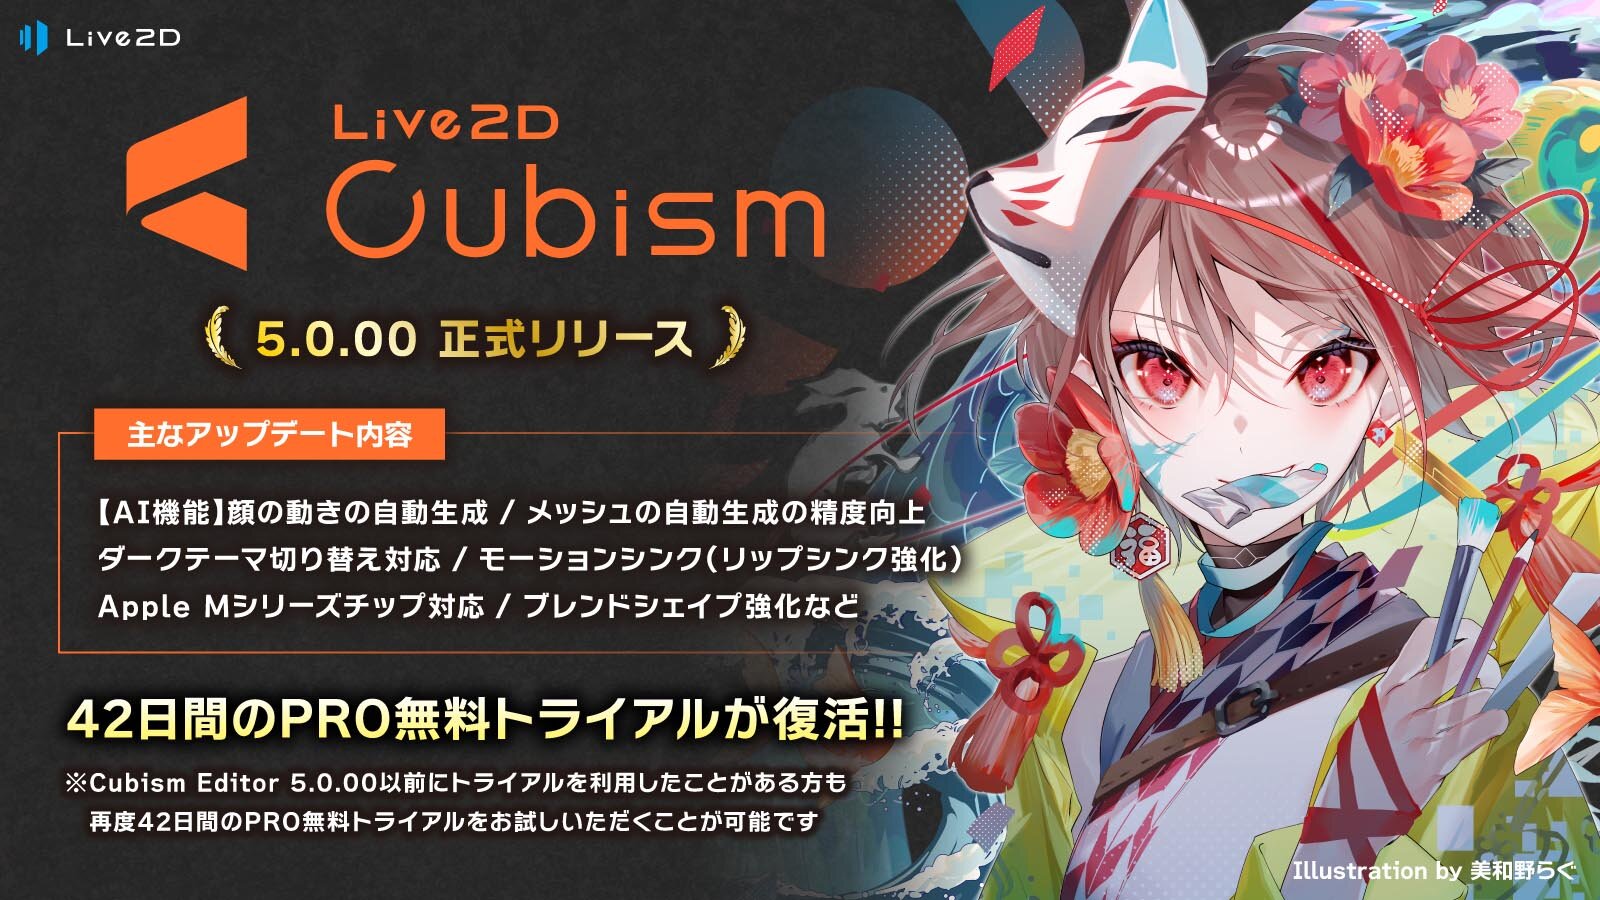 Launching Live2D Cubism 5!  Many updates including AI facial movement function, improved accuracy of automatic grid generation, improved lip sync, etc.